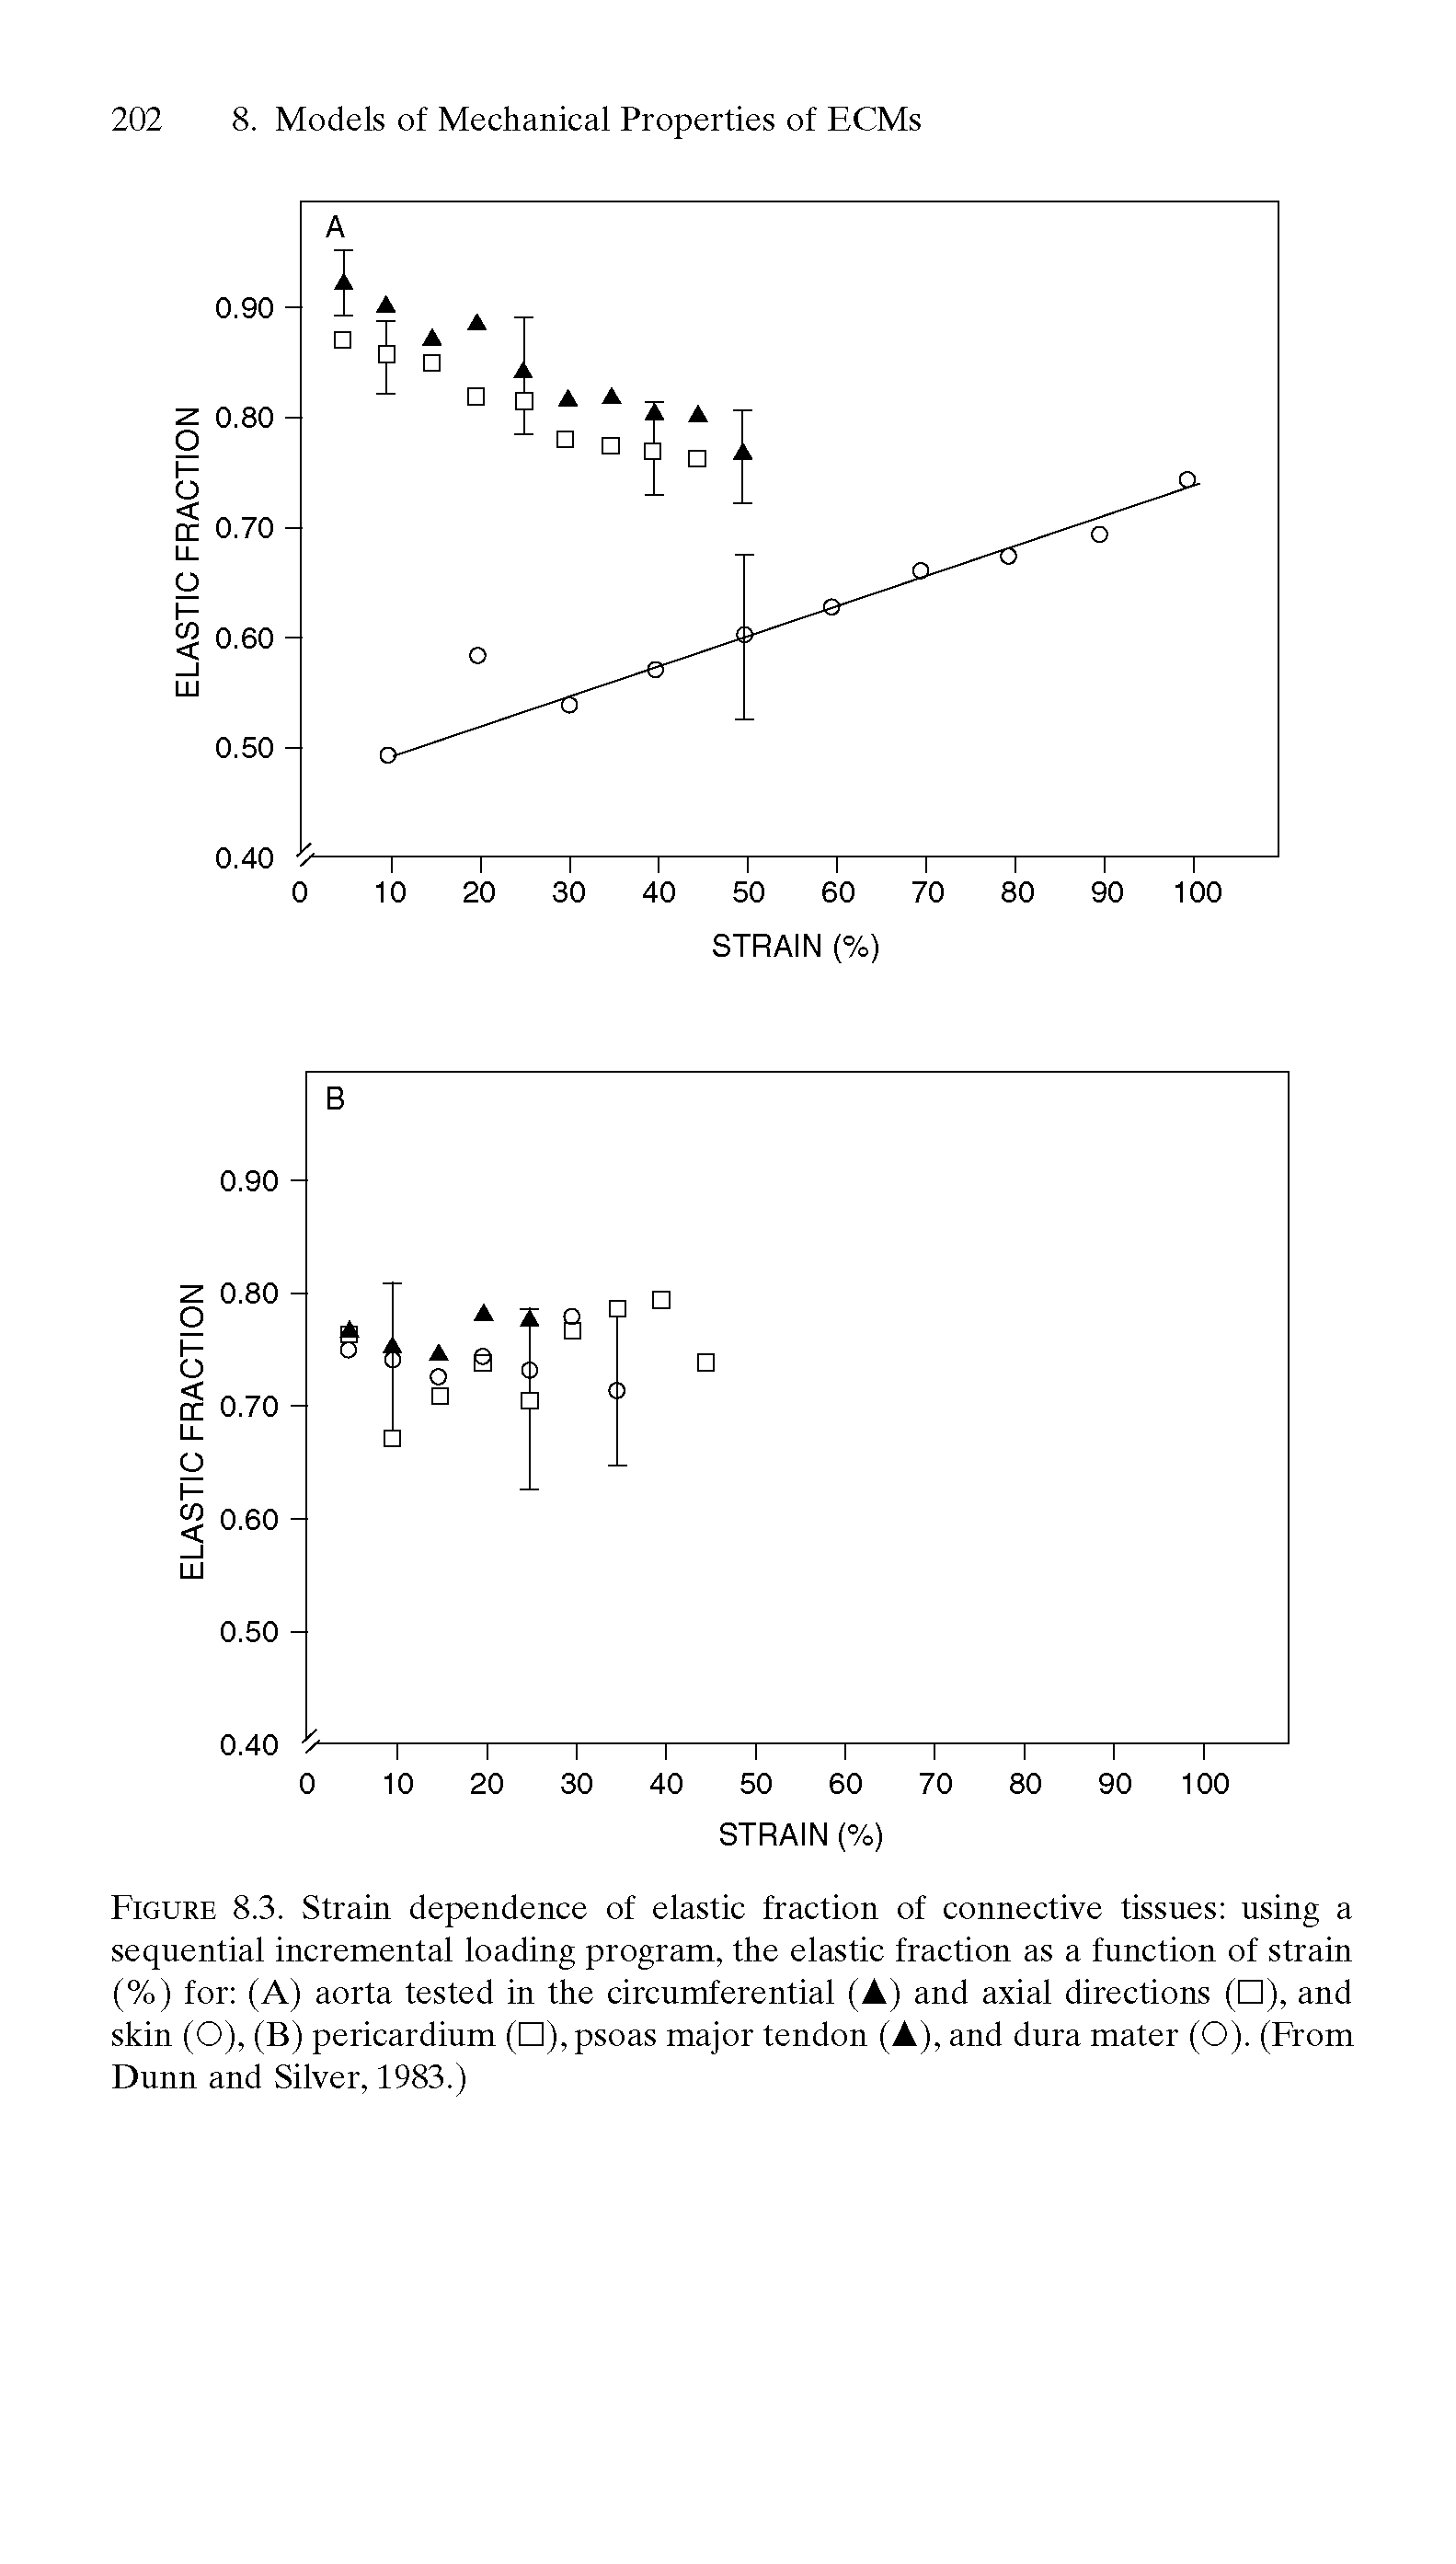 Figure 8.3. Strain dependence of elastic fraction of connective tissues using a sequential incremental loading program, the elastic fraction as a function of strain (%) for (A) aorta tested in the circumferential (A) and axial directions ( ), and skin (O), (B) pericardium ( ), psoas major tendon (A), and dura mater (O). (From Dunn and Silver, 1983.)...